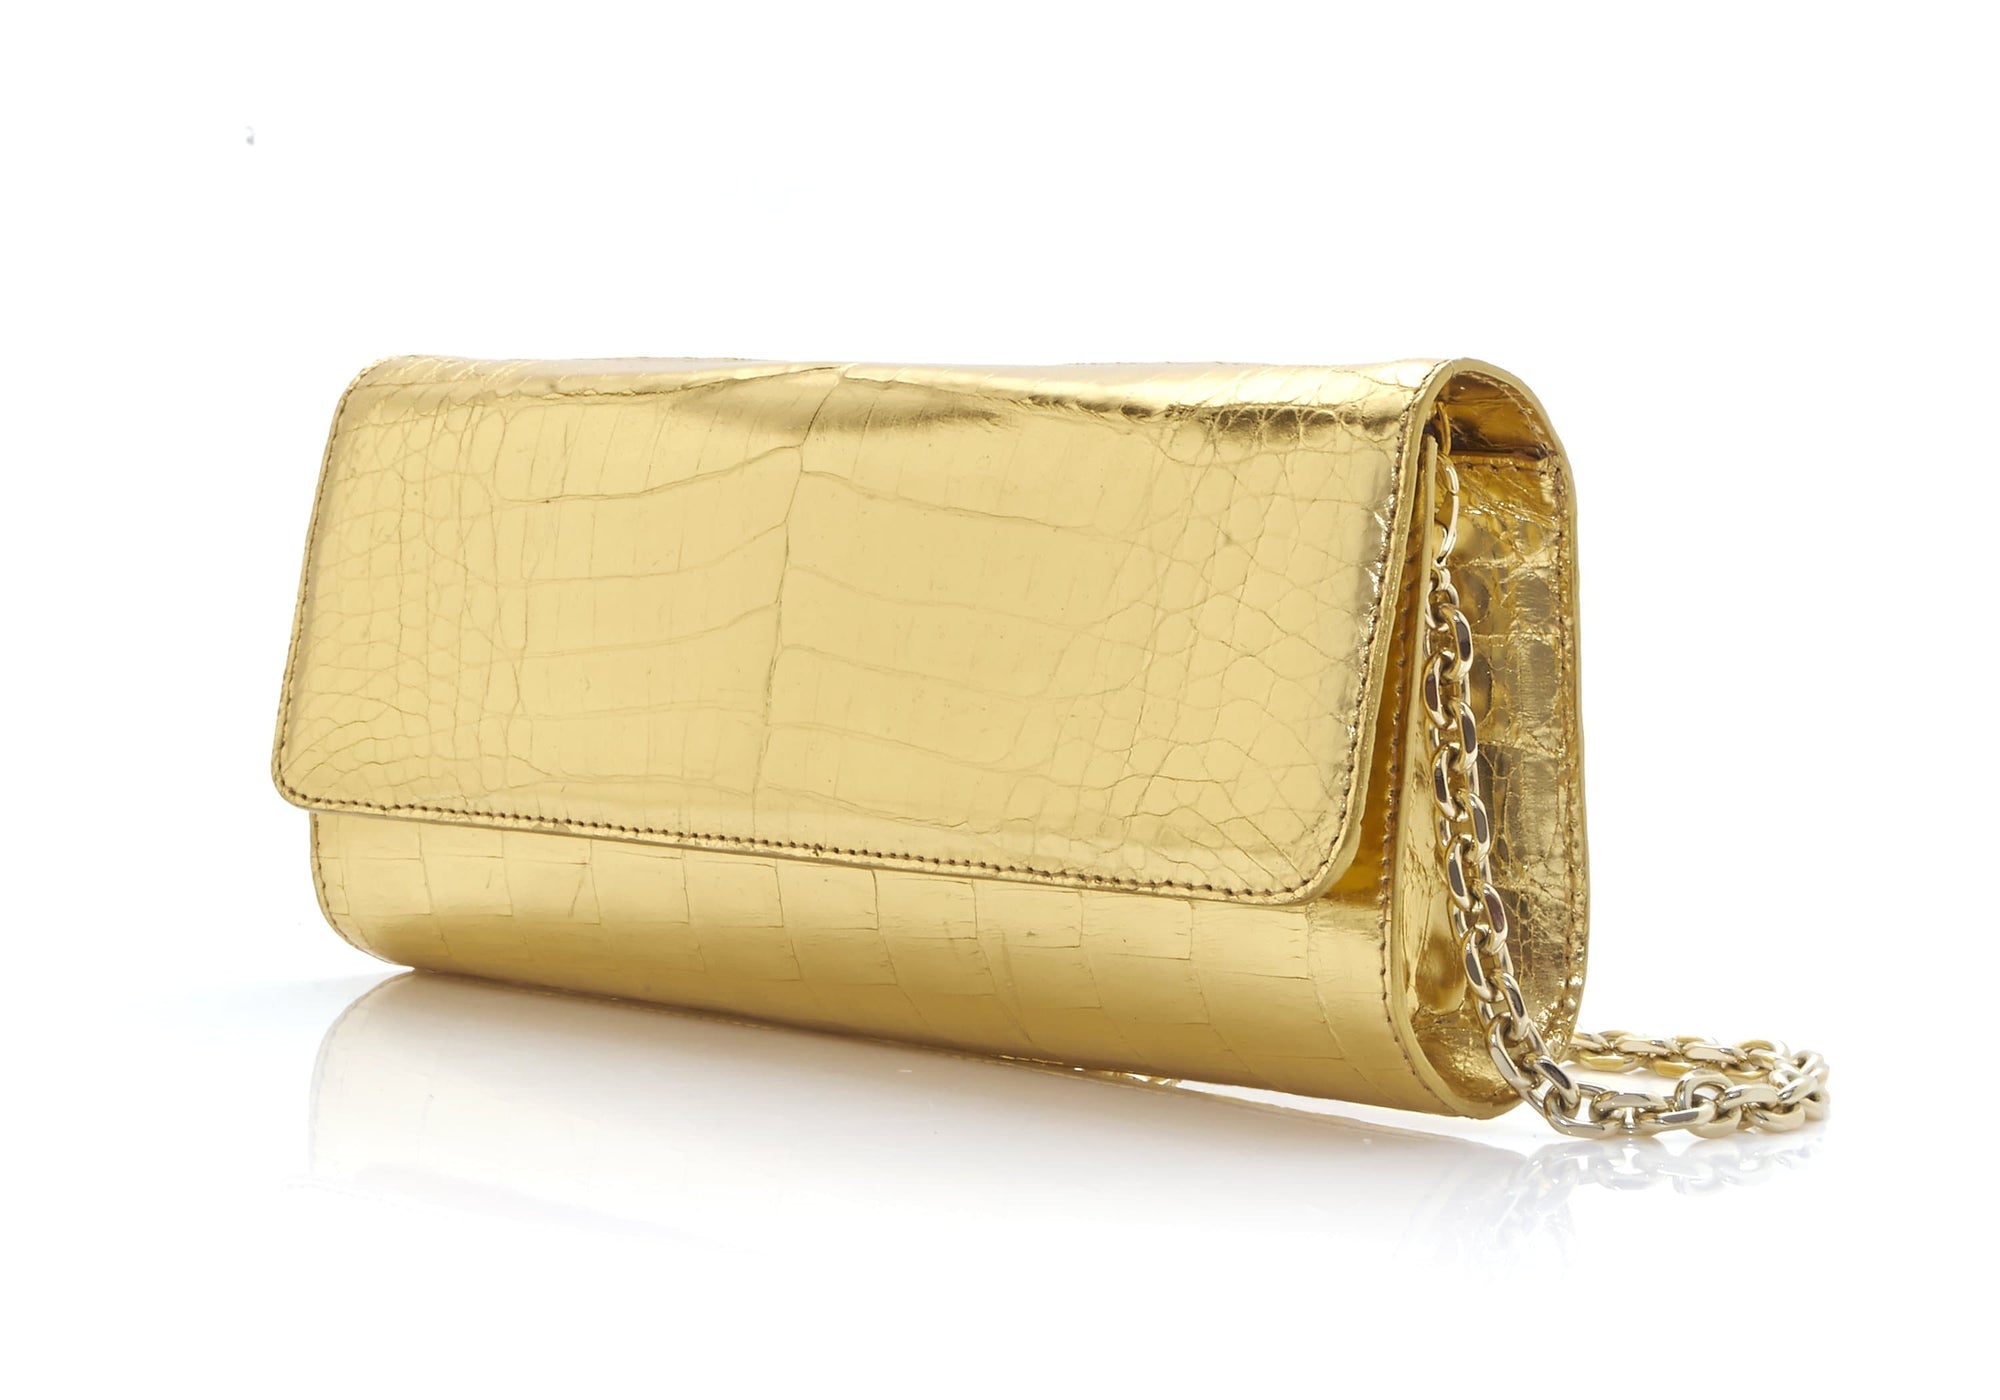 Frills and Thrills: The Magic of a Judith Leiber Clutch Bag